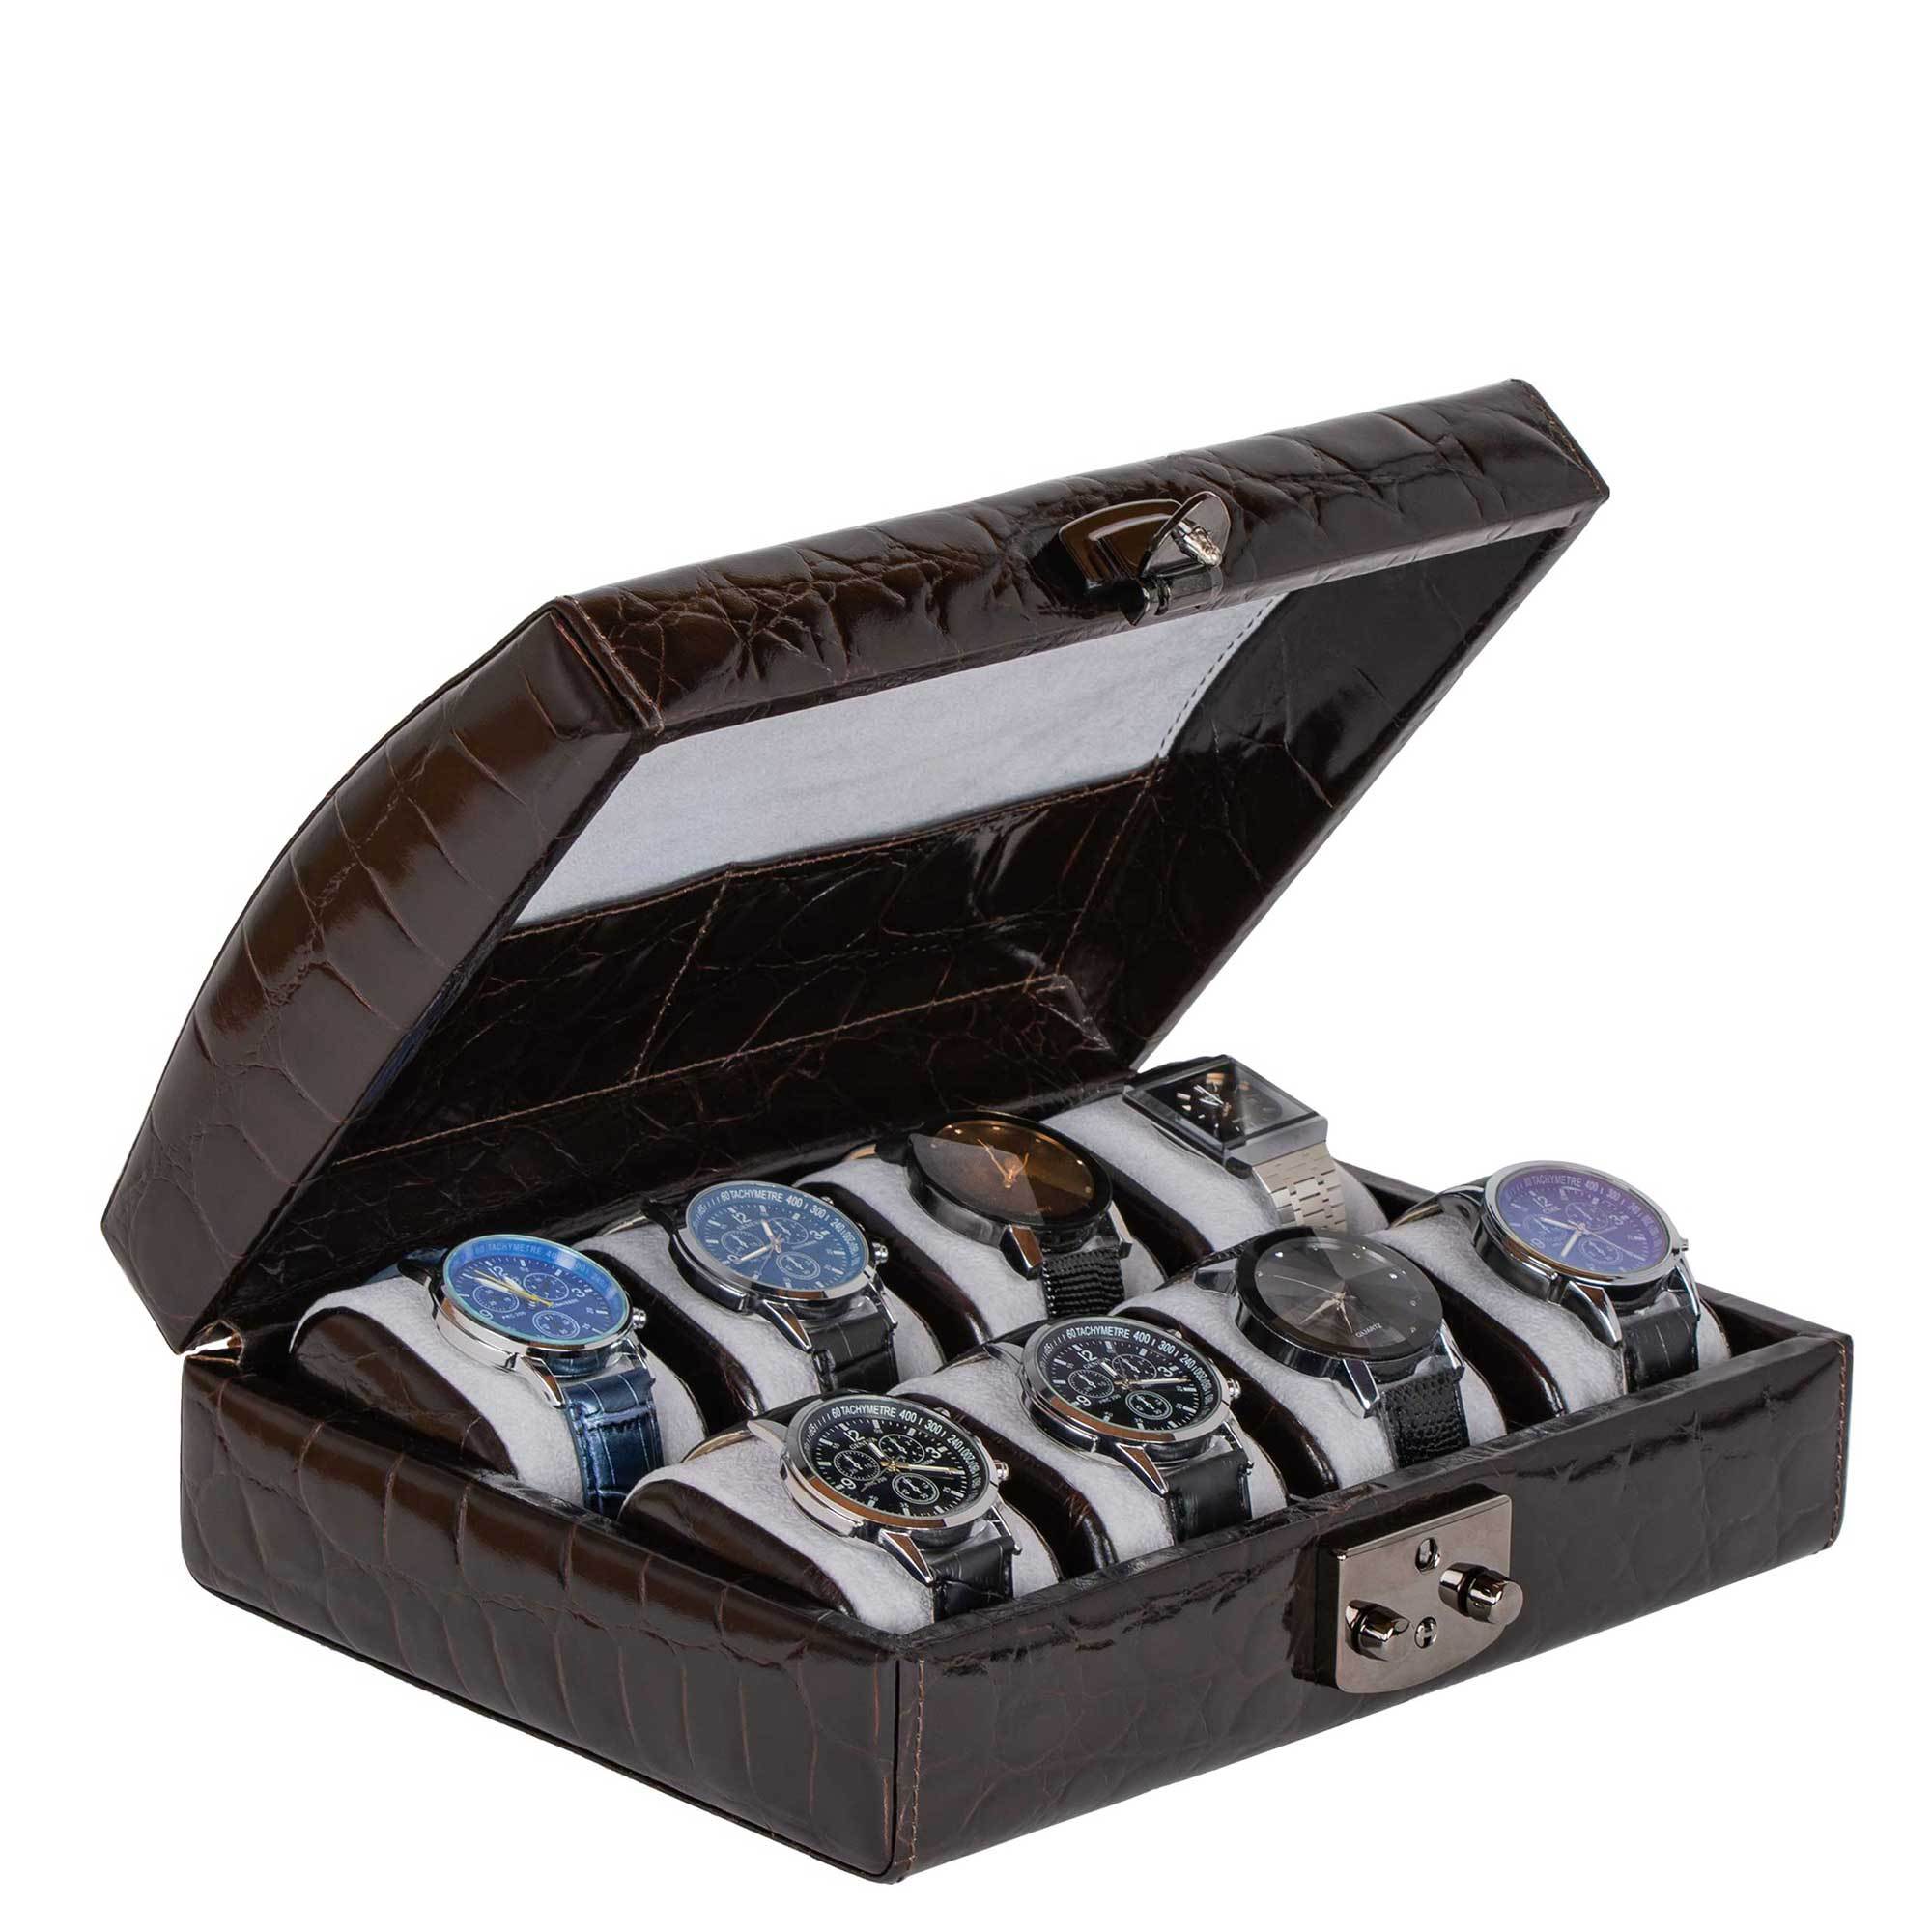 Leather Watch Cases made in Italy - From a single to a 12 watch case, find your best display or travel watch case from DiLoro Leather - Designed in Switzerland